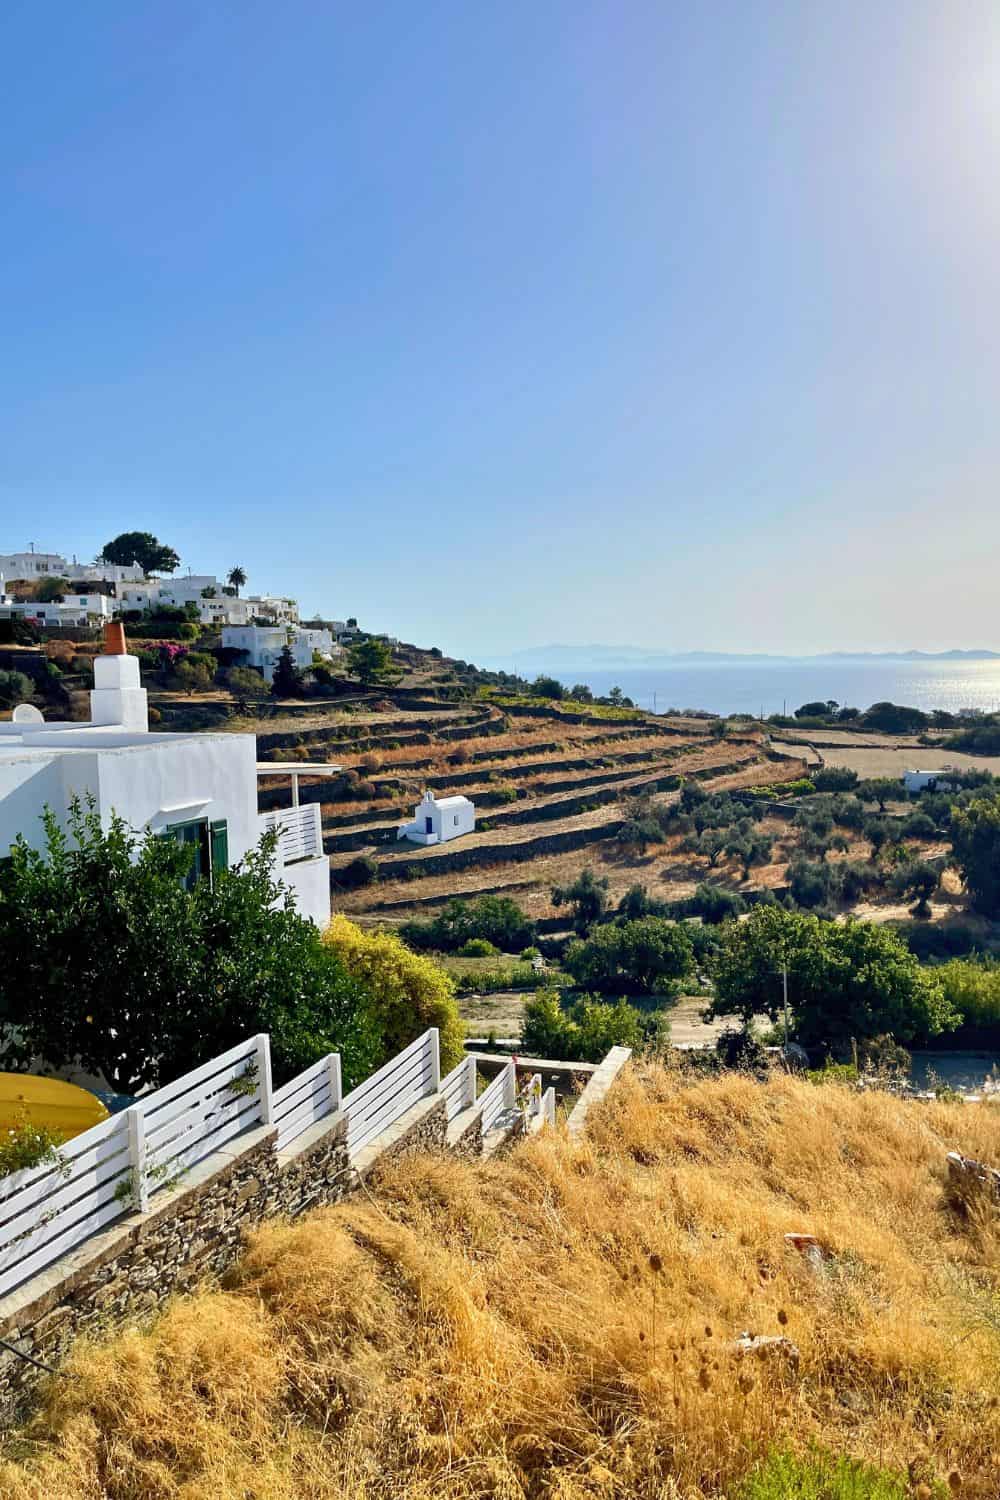 The rolling hills in Sifnos making it worth visiting